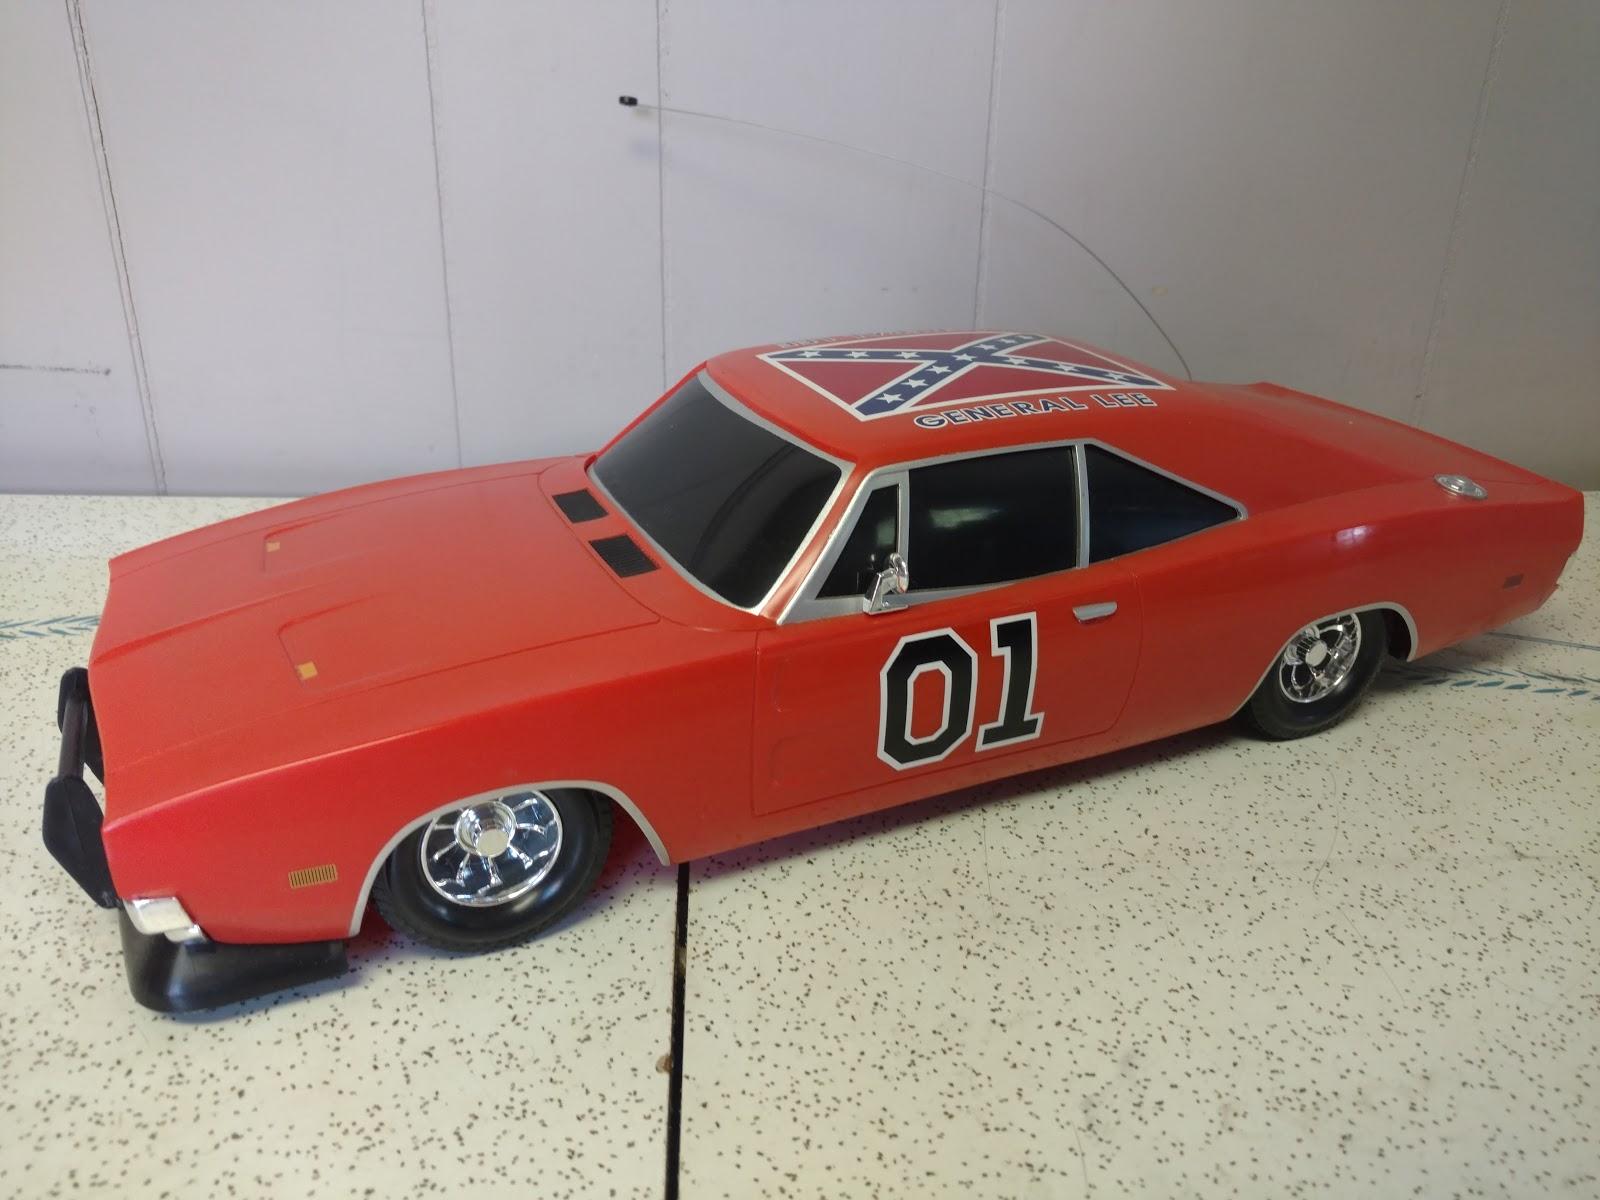 Rc General Lee: Notable features of the RC General Lee